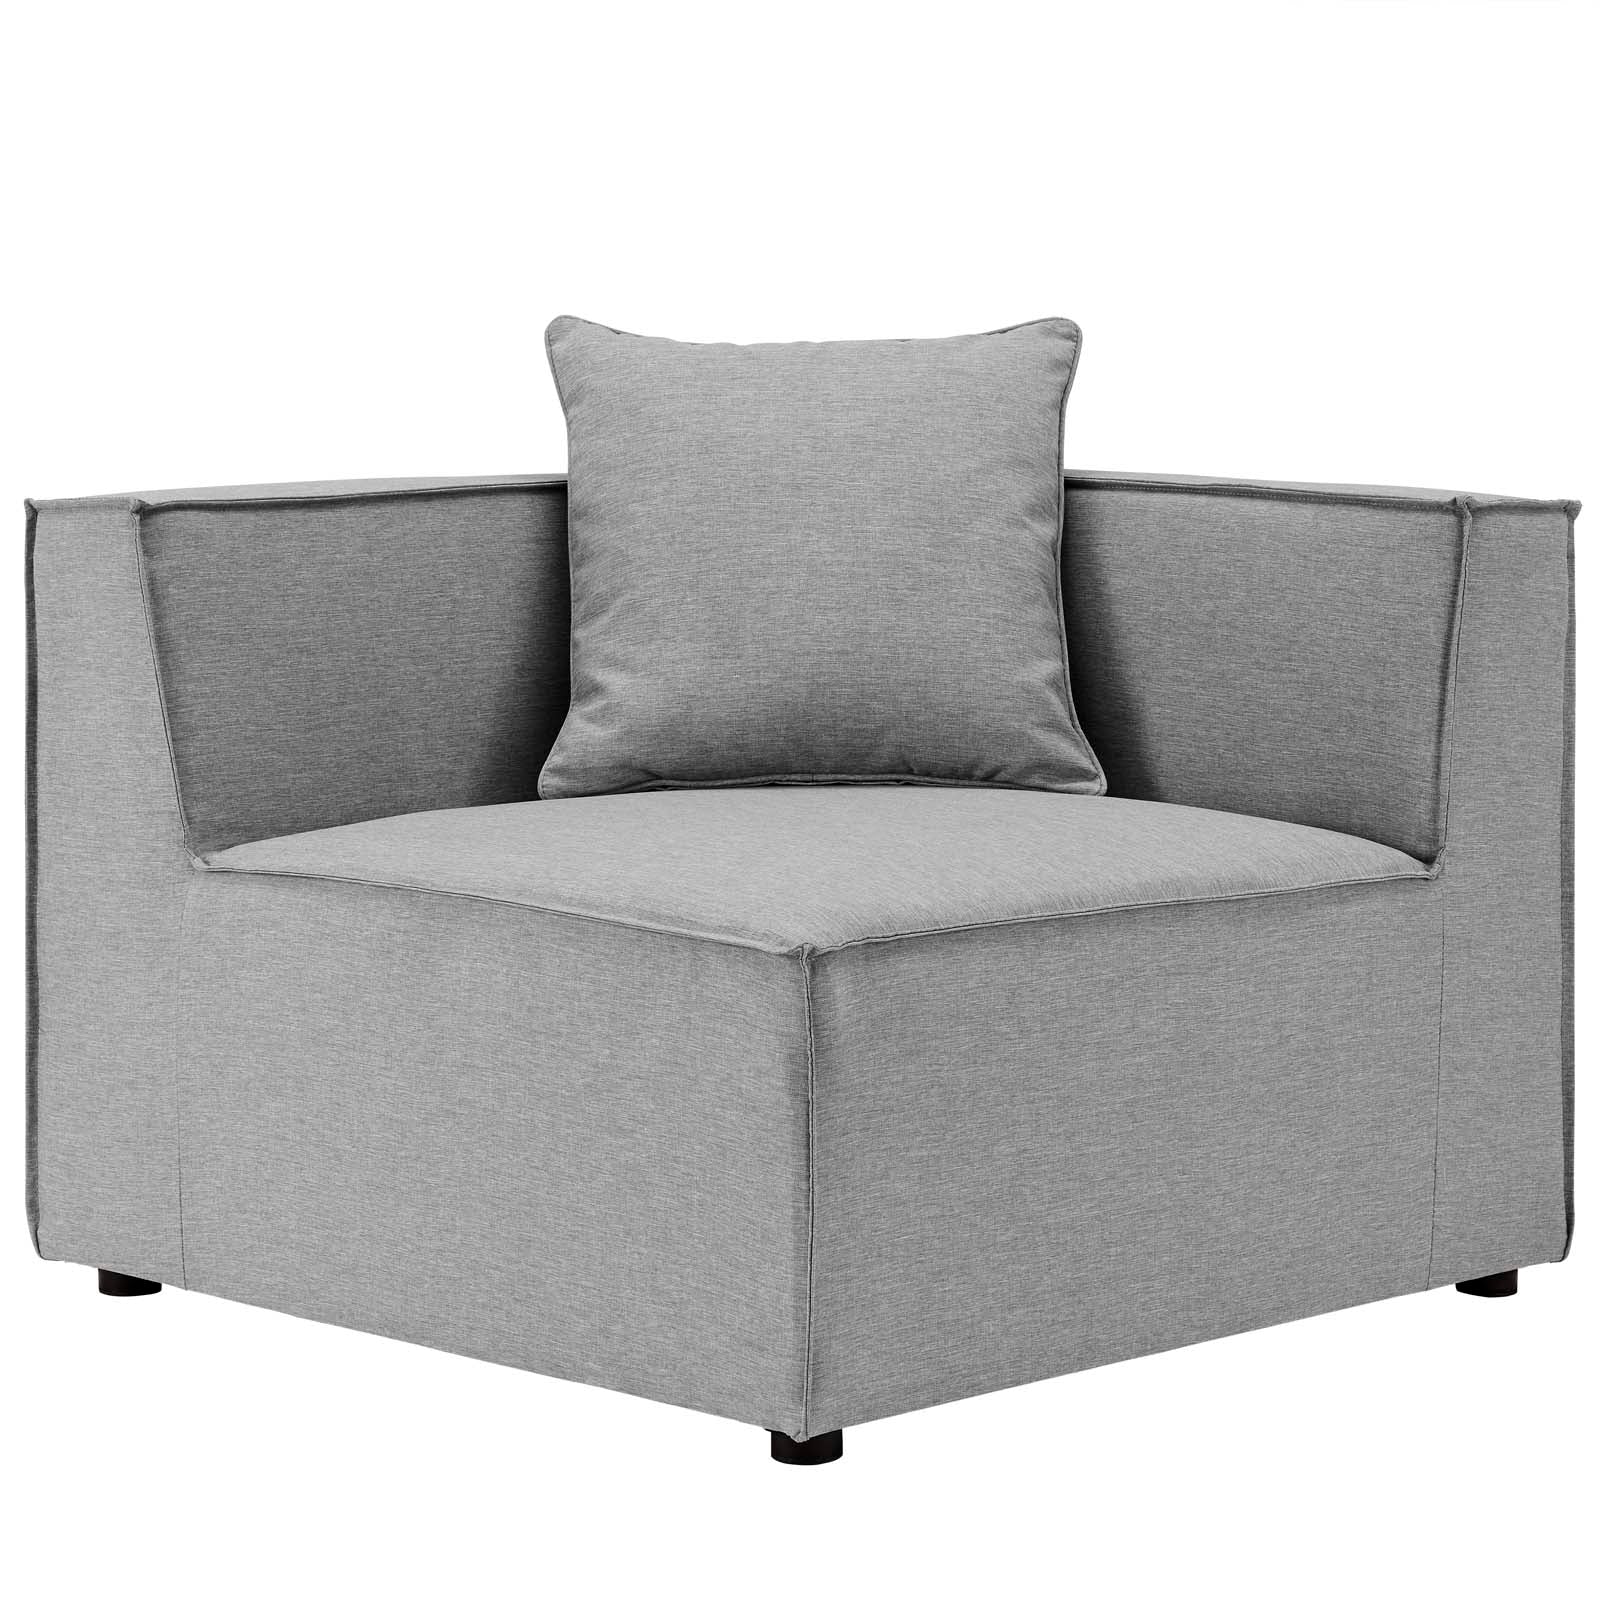 Modway Outdoor Sofas - Saybrook Outdoor Patio Upholstered 2-Piece Sectional Sofa Loveseat Gray